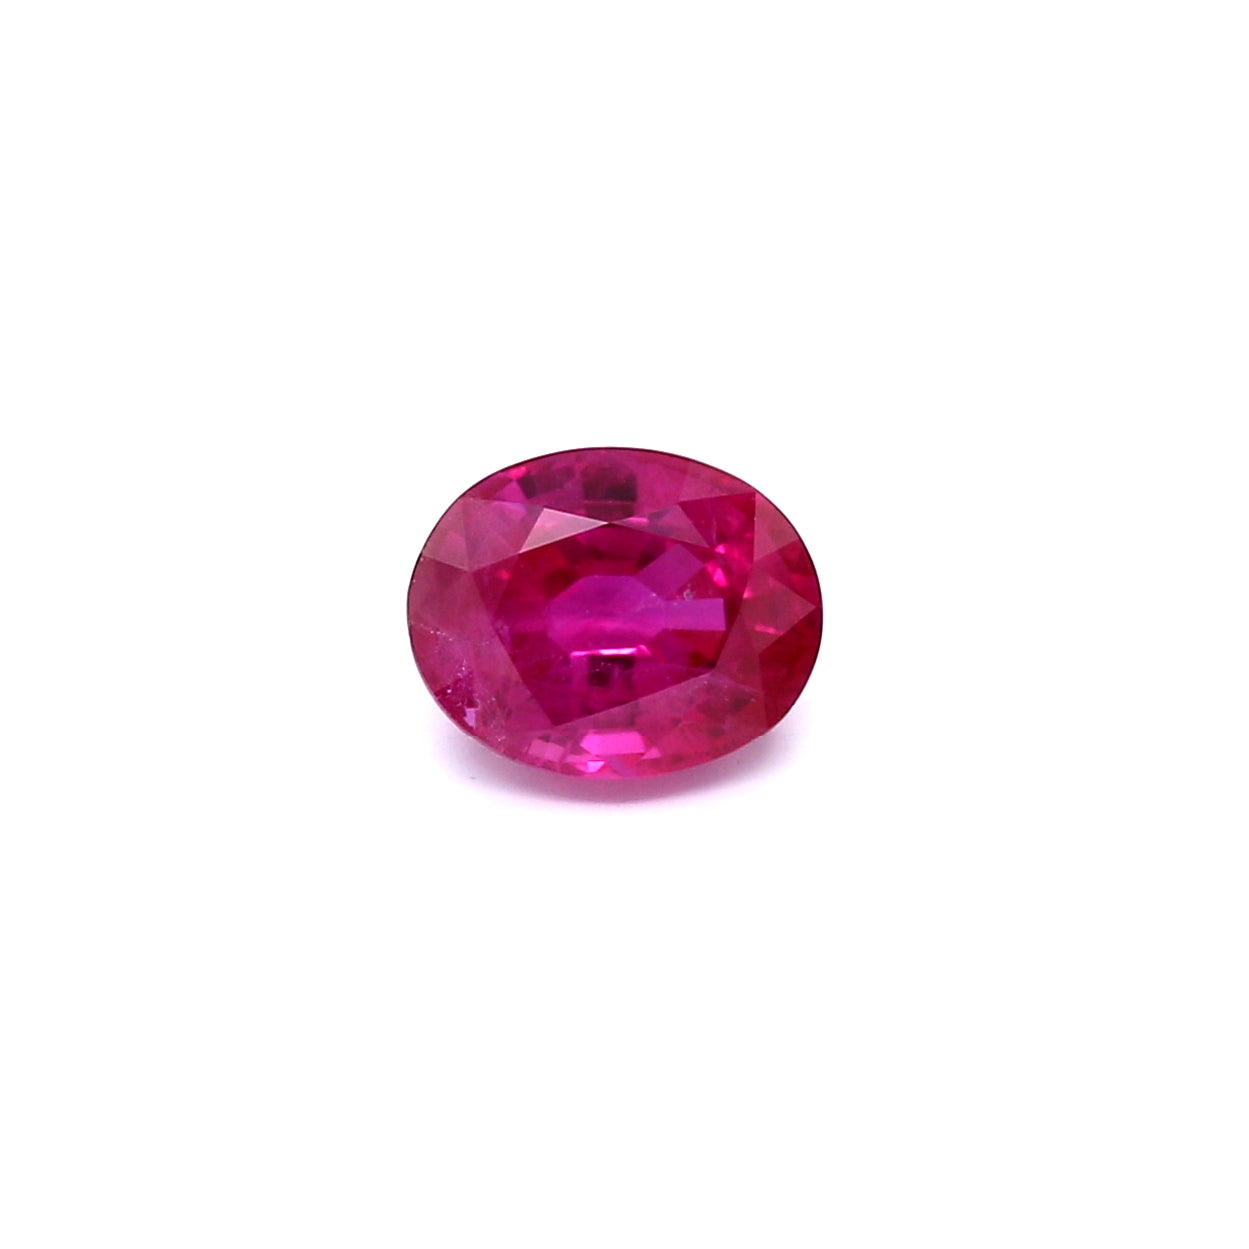 1.39ct Pinkish Red, Oval Ruby, H(a), Myanmar - 7.23 x 5.81 x 3.84mm